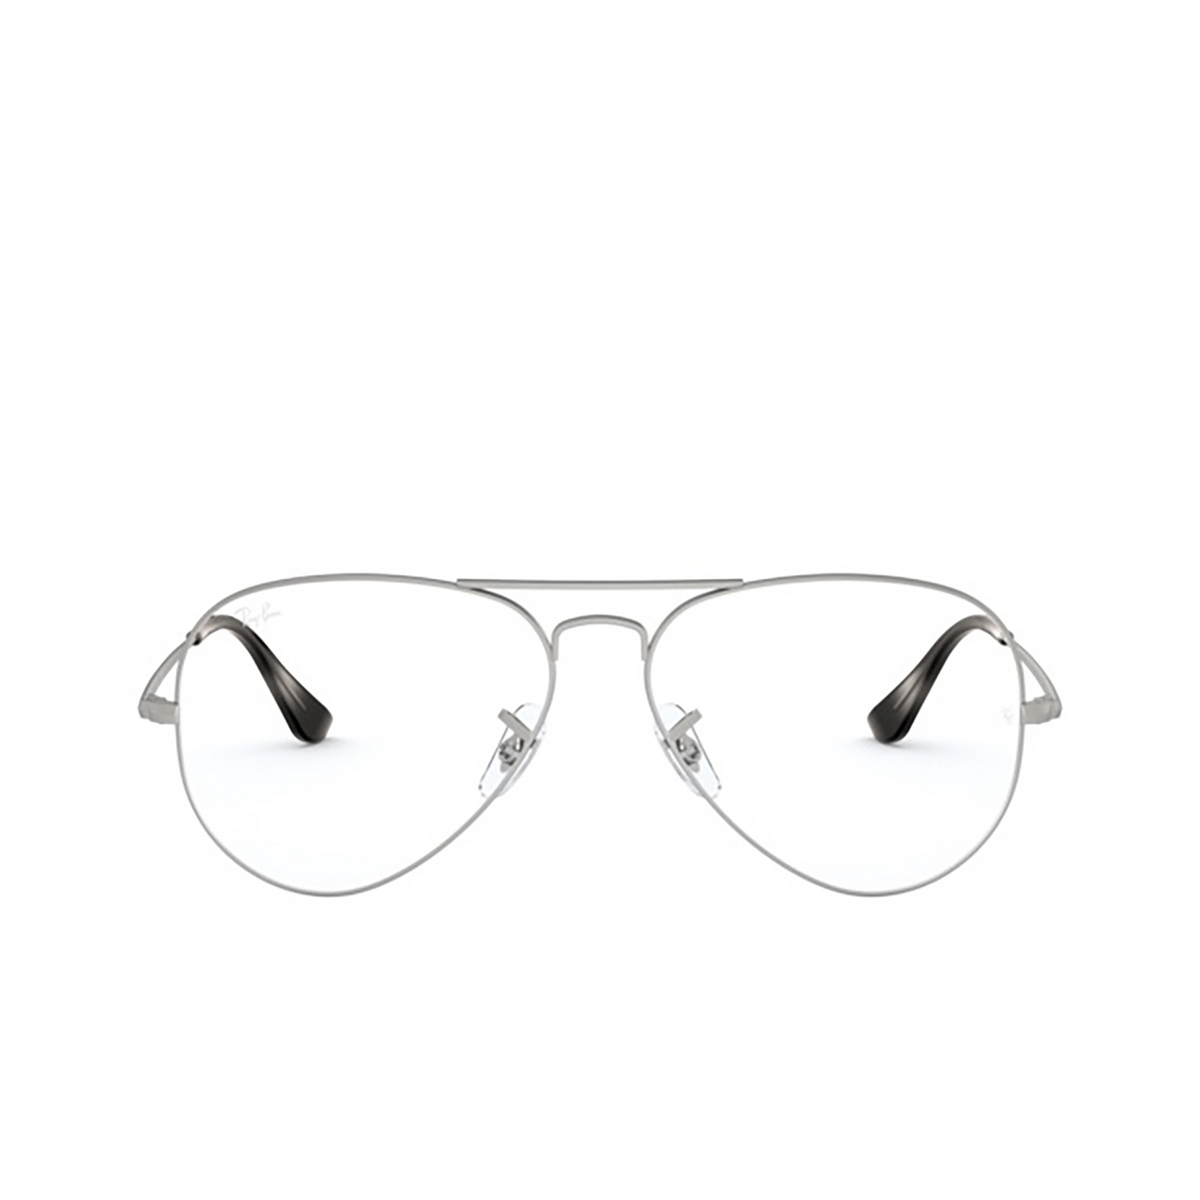 Ray-Ban® Aviator Eyeglasses: Aviator RX6489 color Matte Silver 2538 - front view.